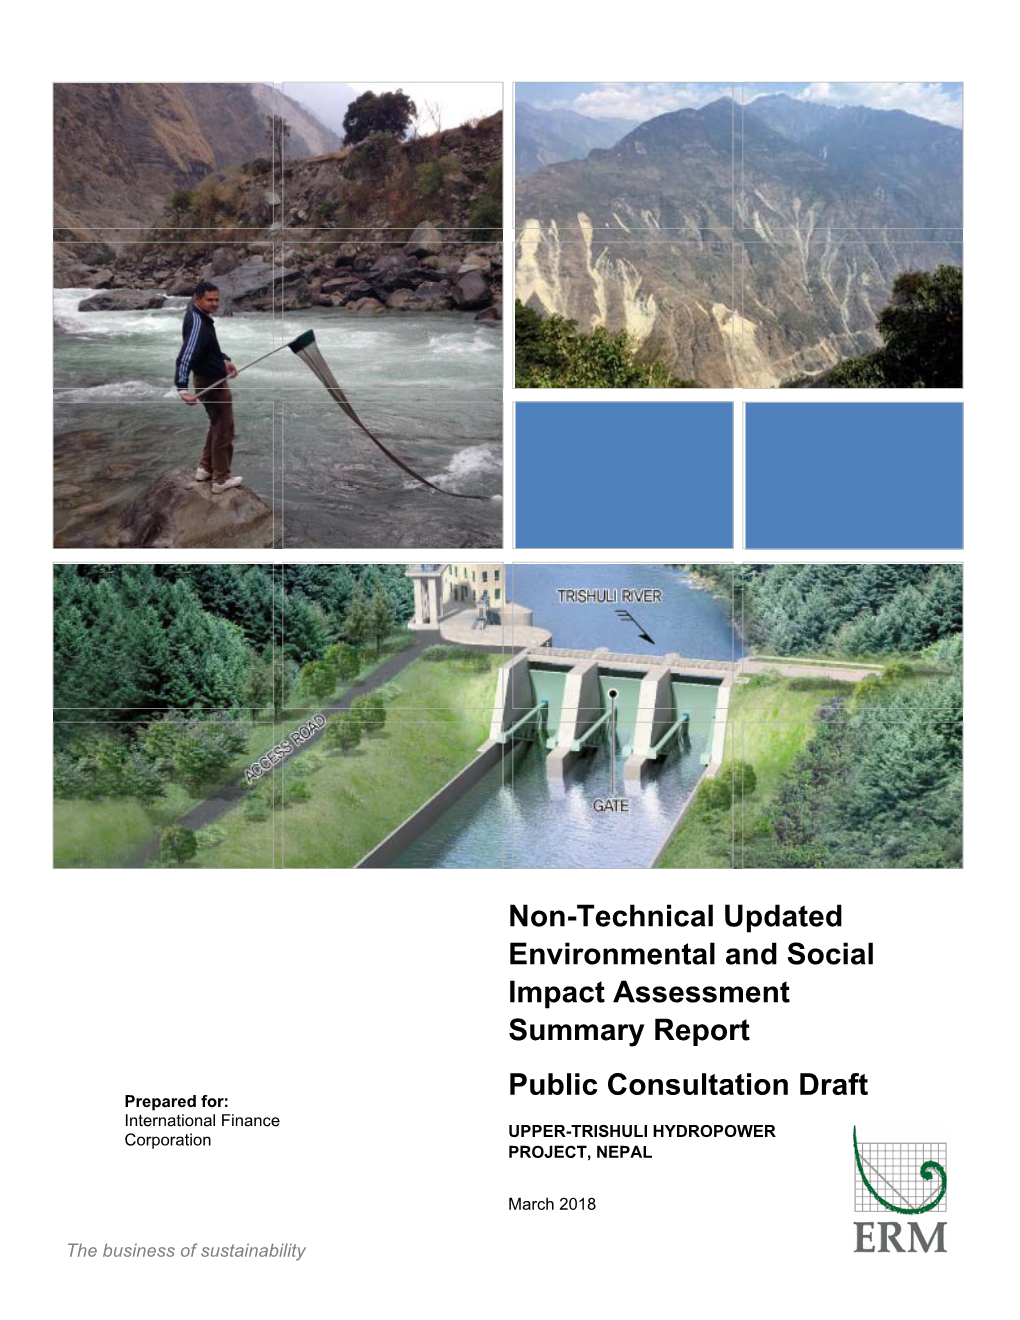 Non-Technical Updated Environmental and Social Impact